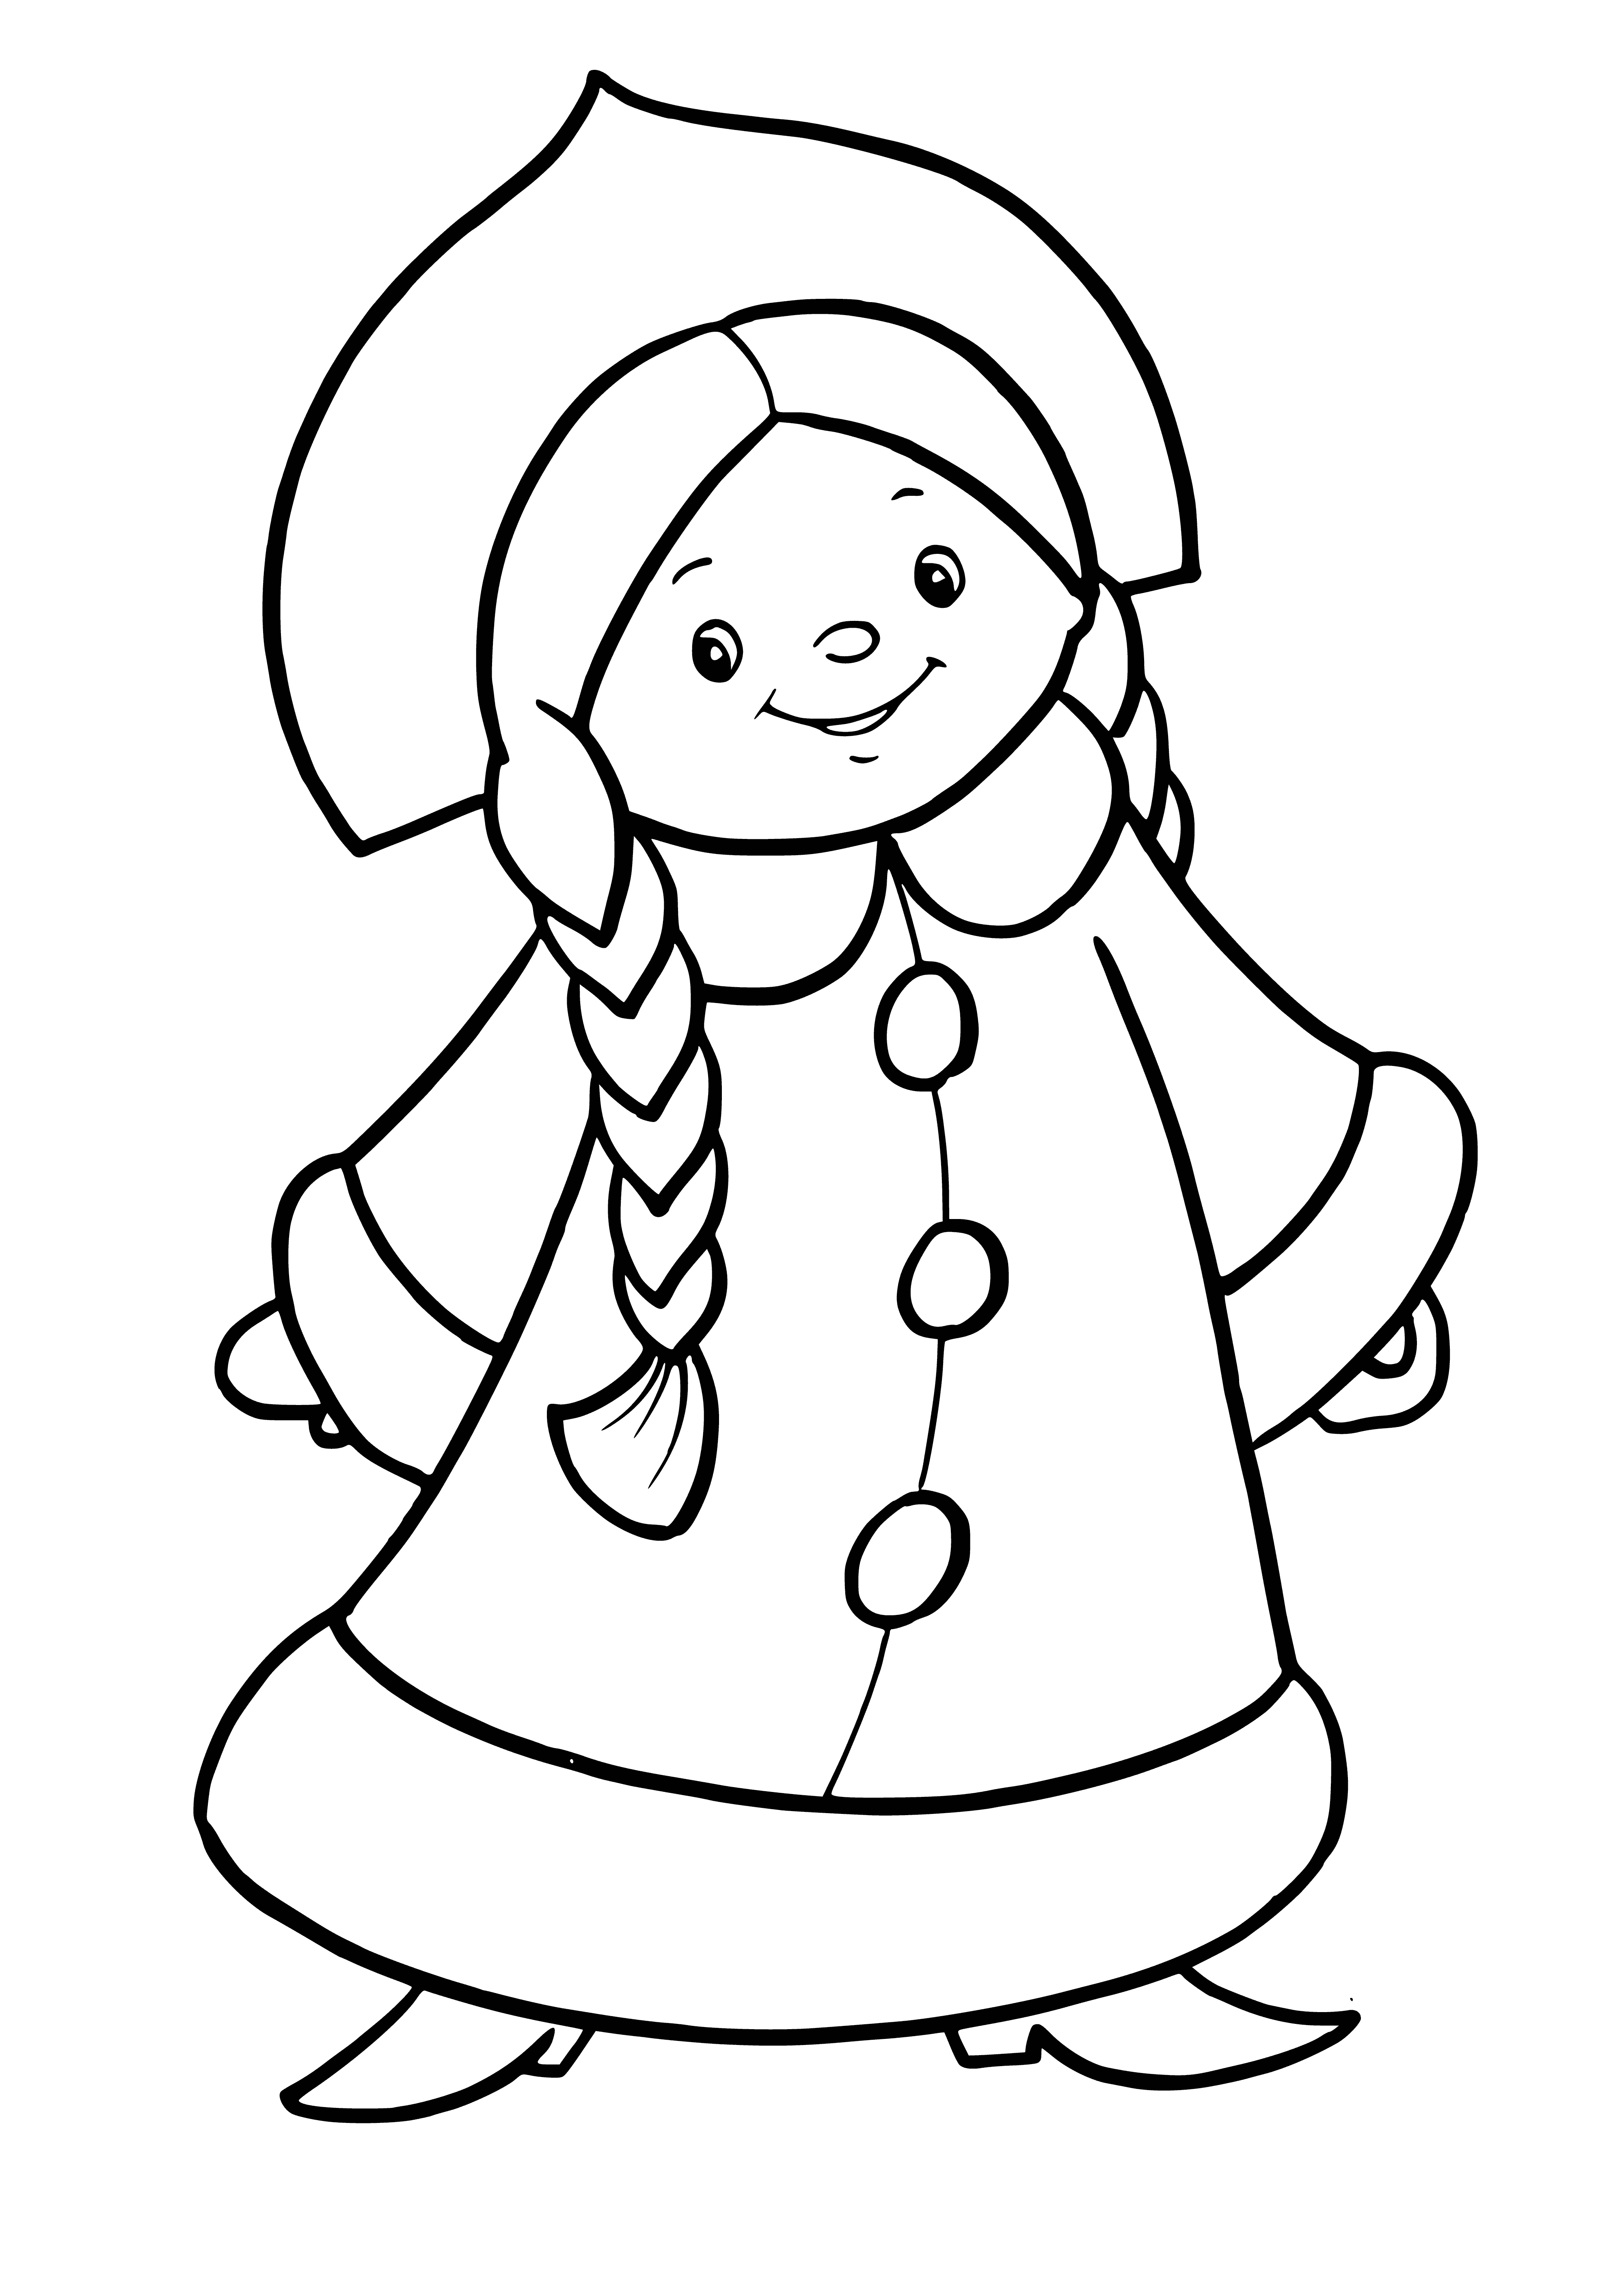 Snow Maiden wears white fur-trimmed dress, evergreen wreath, holds broom and scarf.